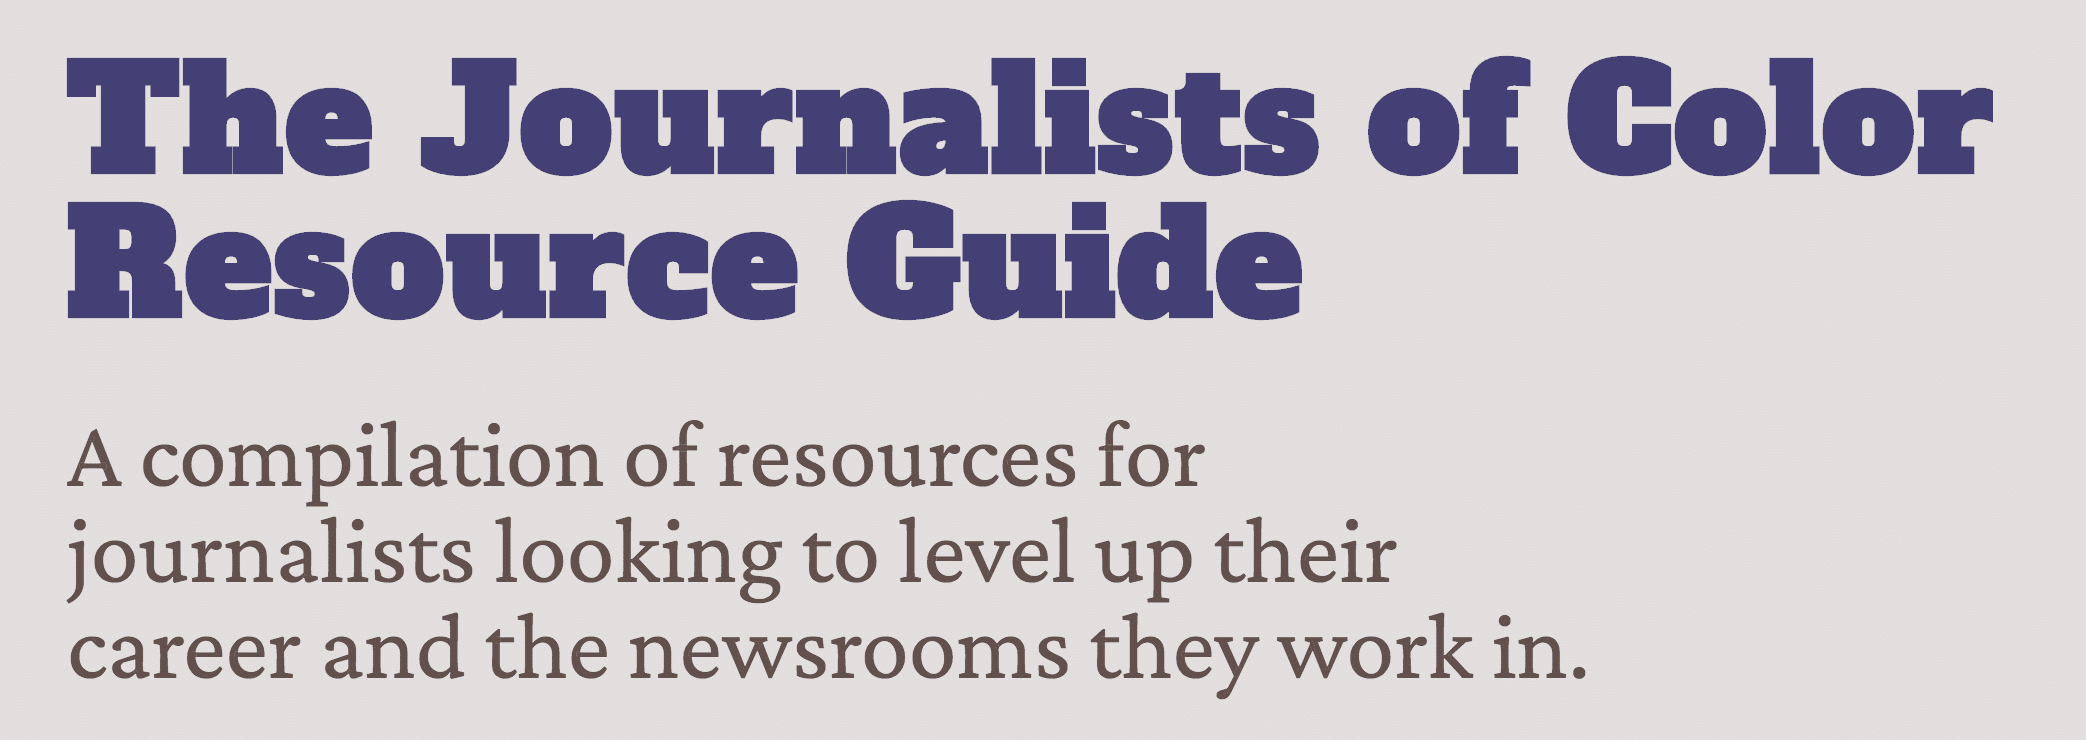 Decoration only: A screenshot of text against a gray background that reads, "The Journalists of Color Resource Guide: A compilation of resources for journalists looking to level up their career and the newsrooms they work in."